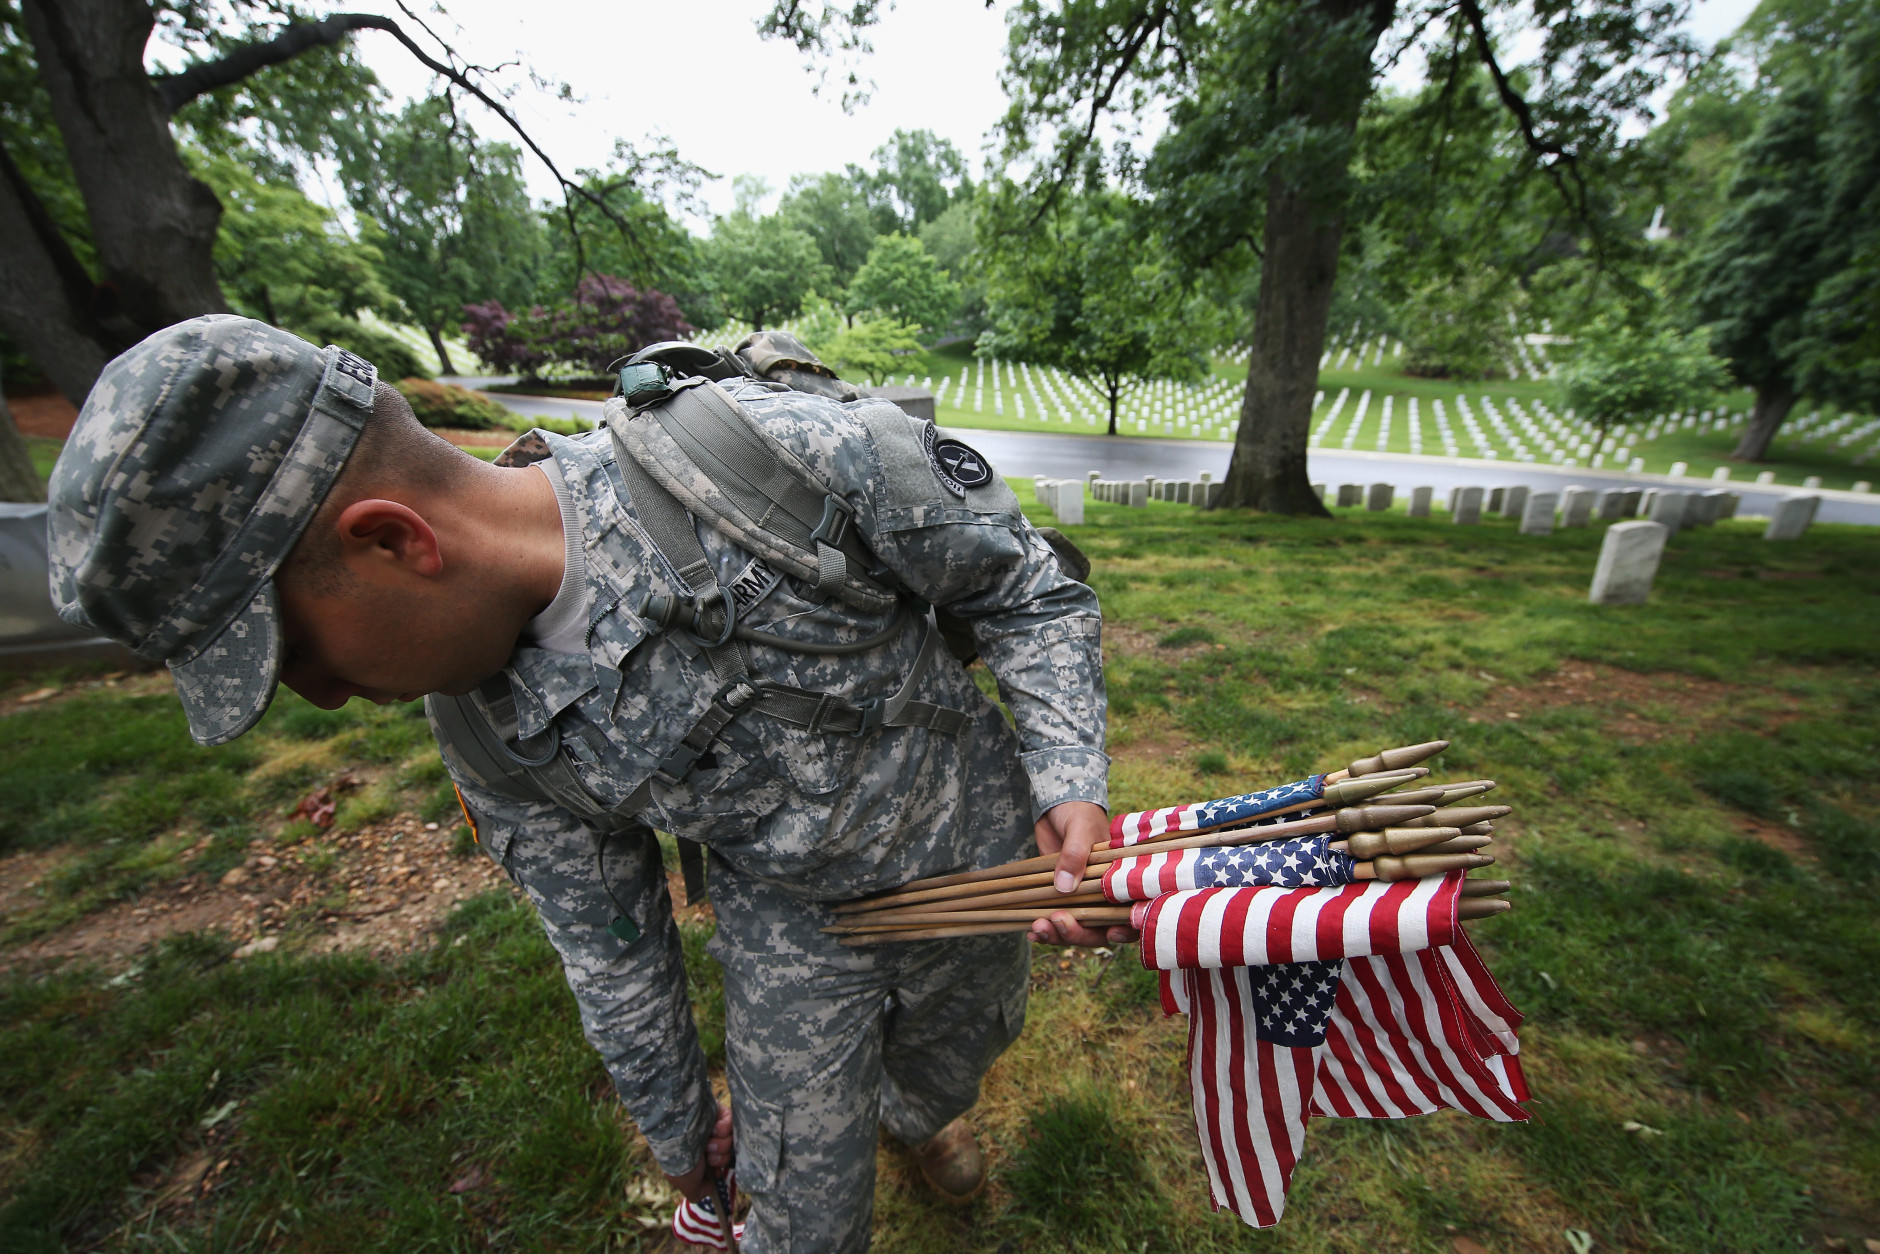 ARLINGTON, VA - MAY 21:  Members of the 3rd U.S. Infantry Regiment place American flags at the graves of U.S. soldiers buried at Arlington National Cemetery, in preparation for Memorial Day May 21, 2015 in Arlington, Virginia. 'Flags-In' has become an annual ceremony since the 3rd U.S. Infantry Regiment (The Old Guard) was designated to be an Army's official ceremonial unit in 1948.  (Photo by Win McNamee/Getty Images)